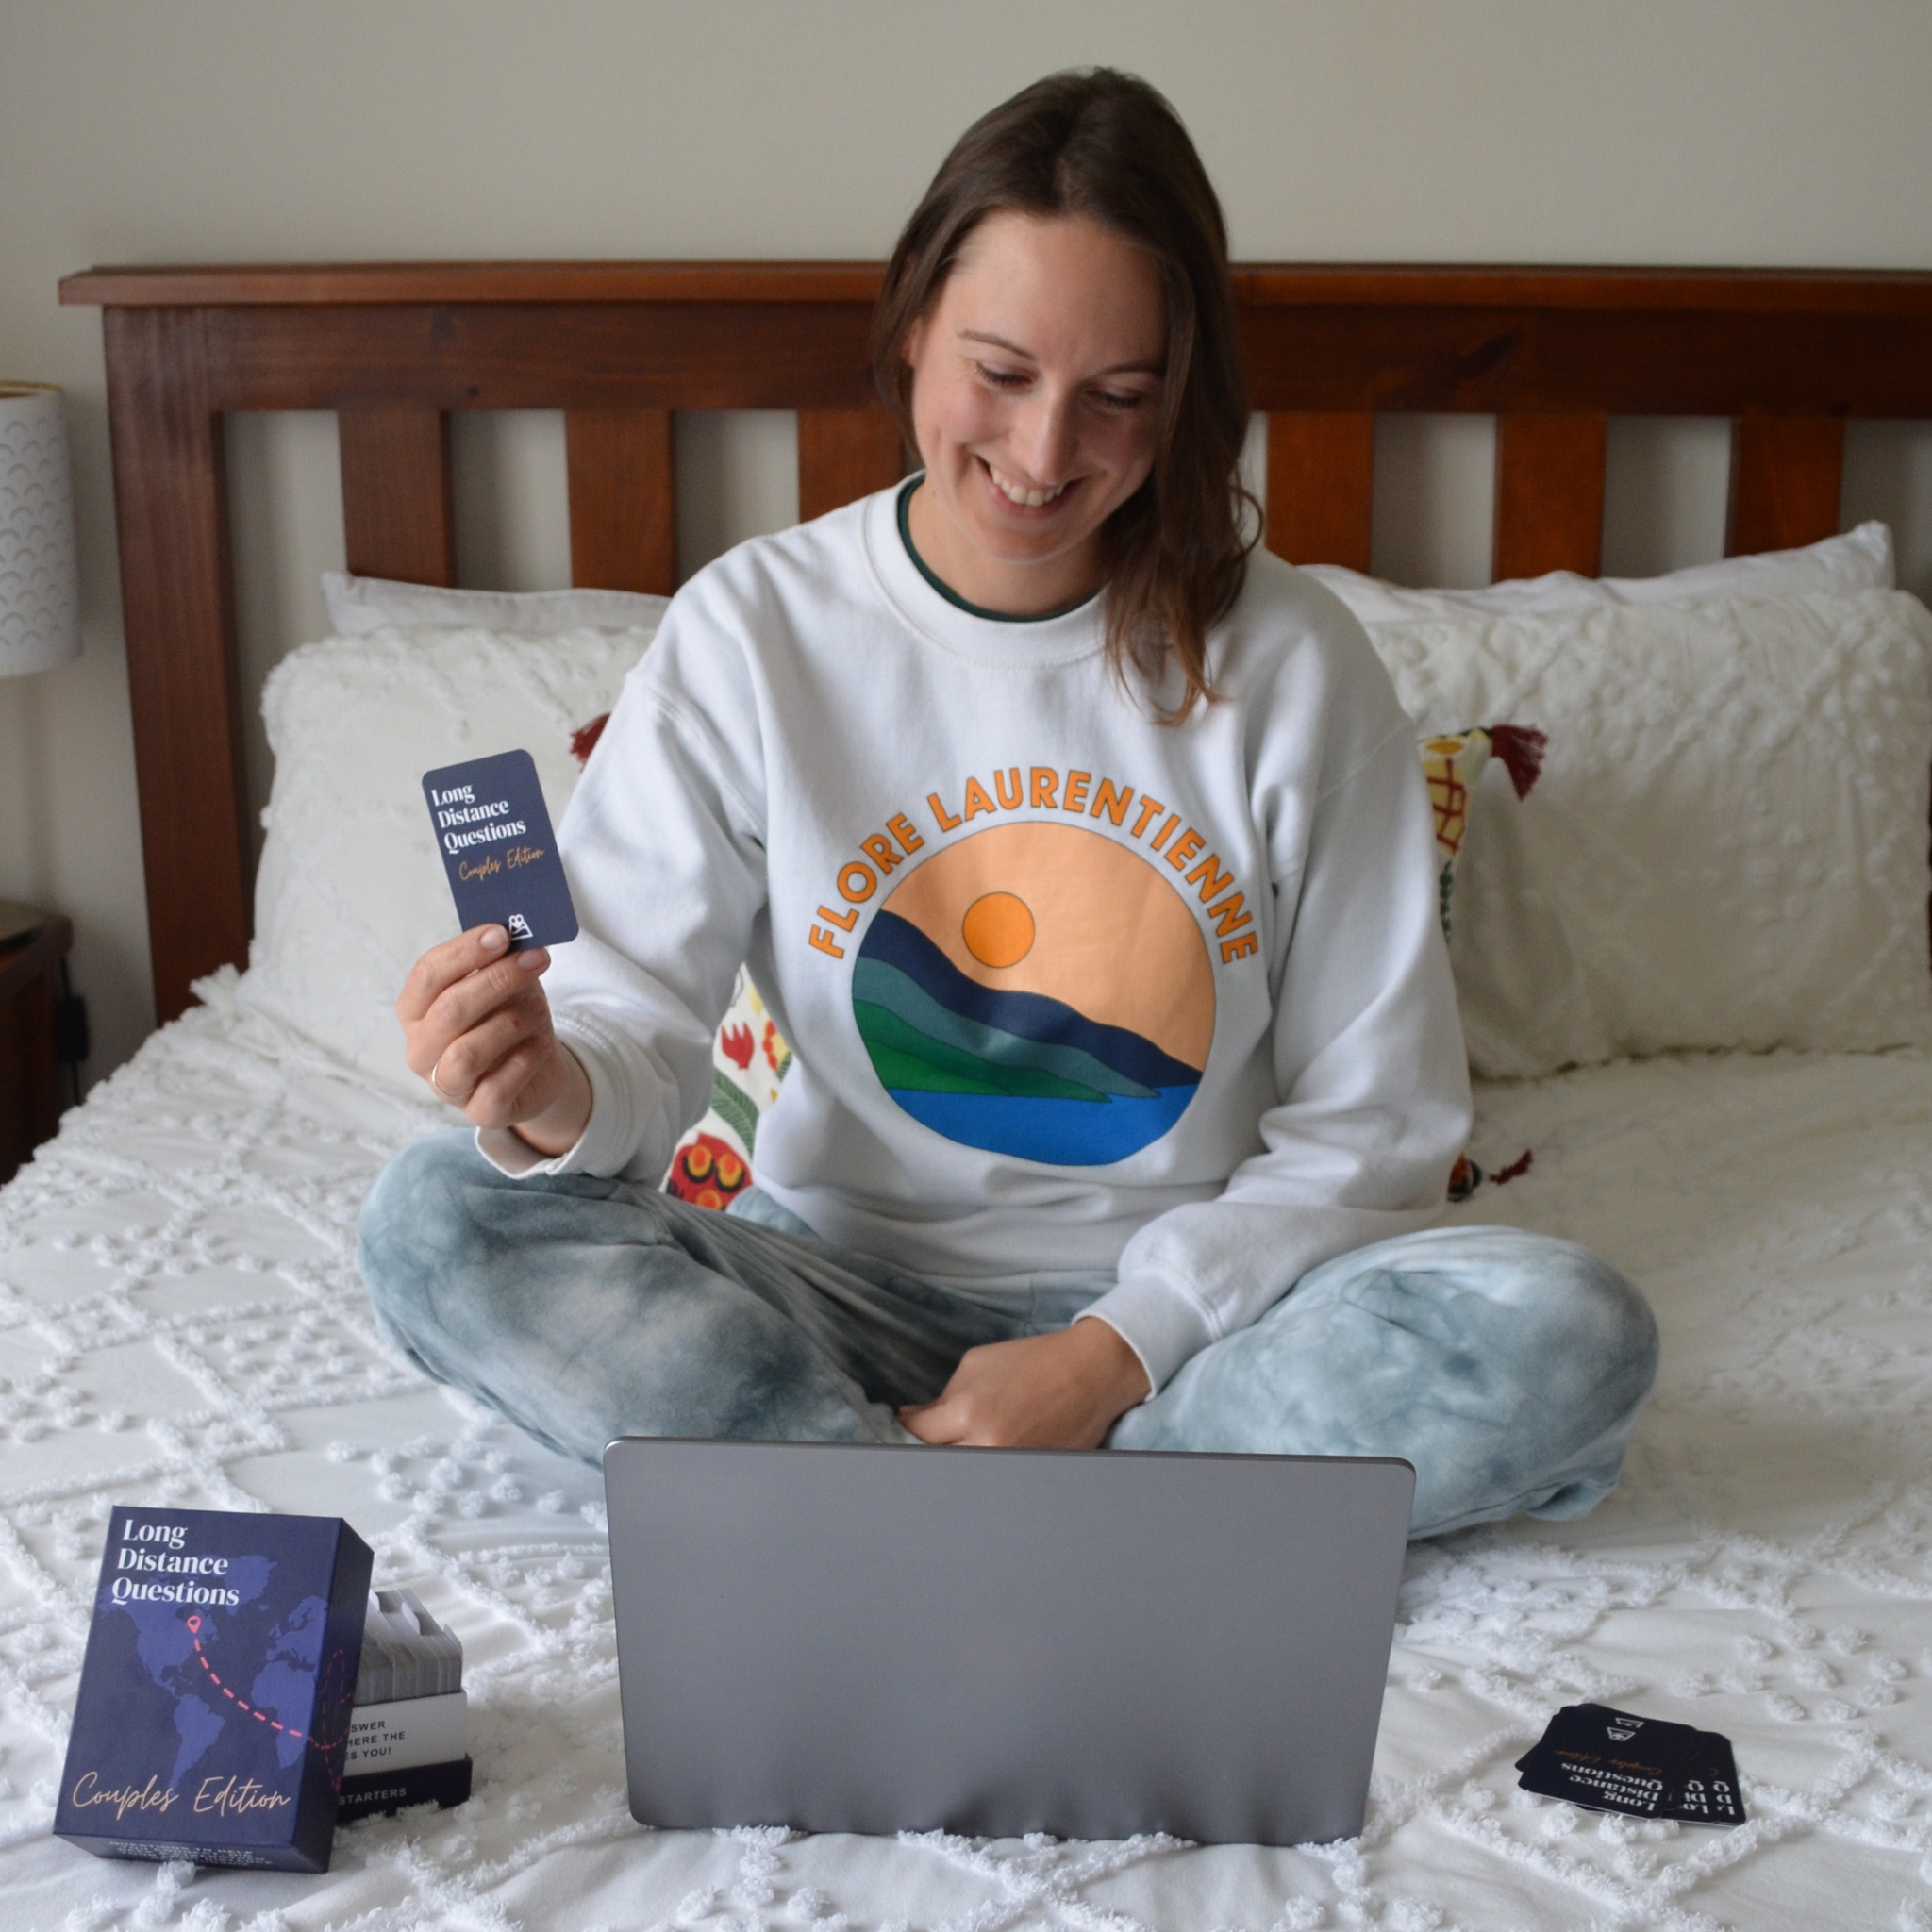 Person sitting on bed, smiling, holding a card labeled 'Long Distance Questions' next to a laptop.